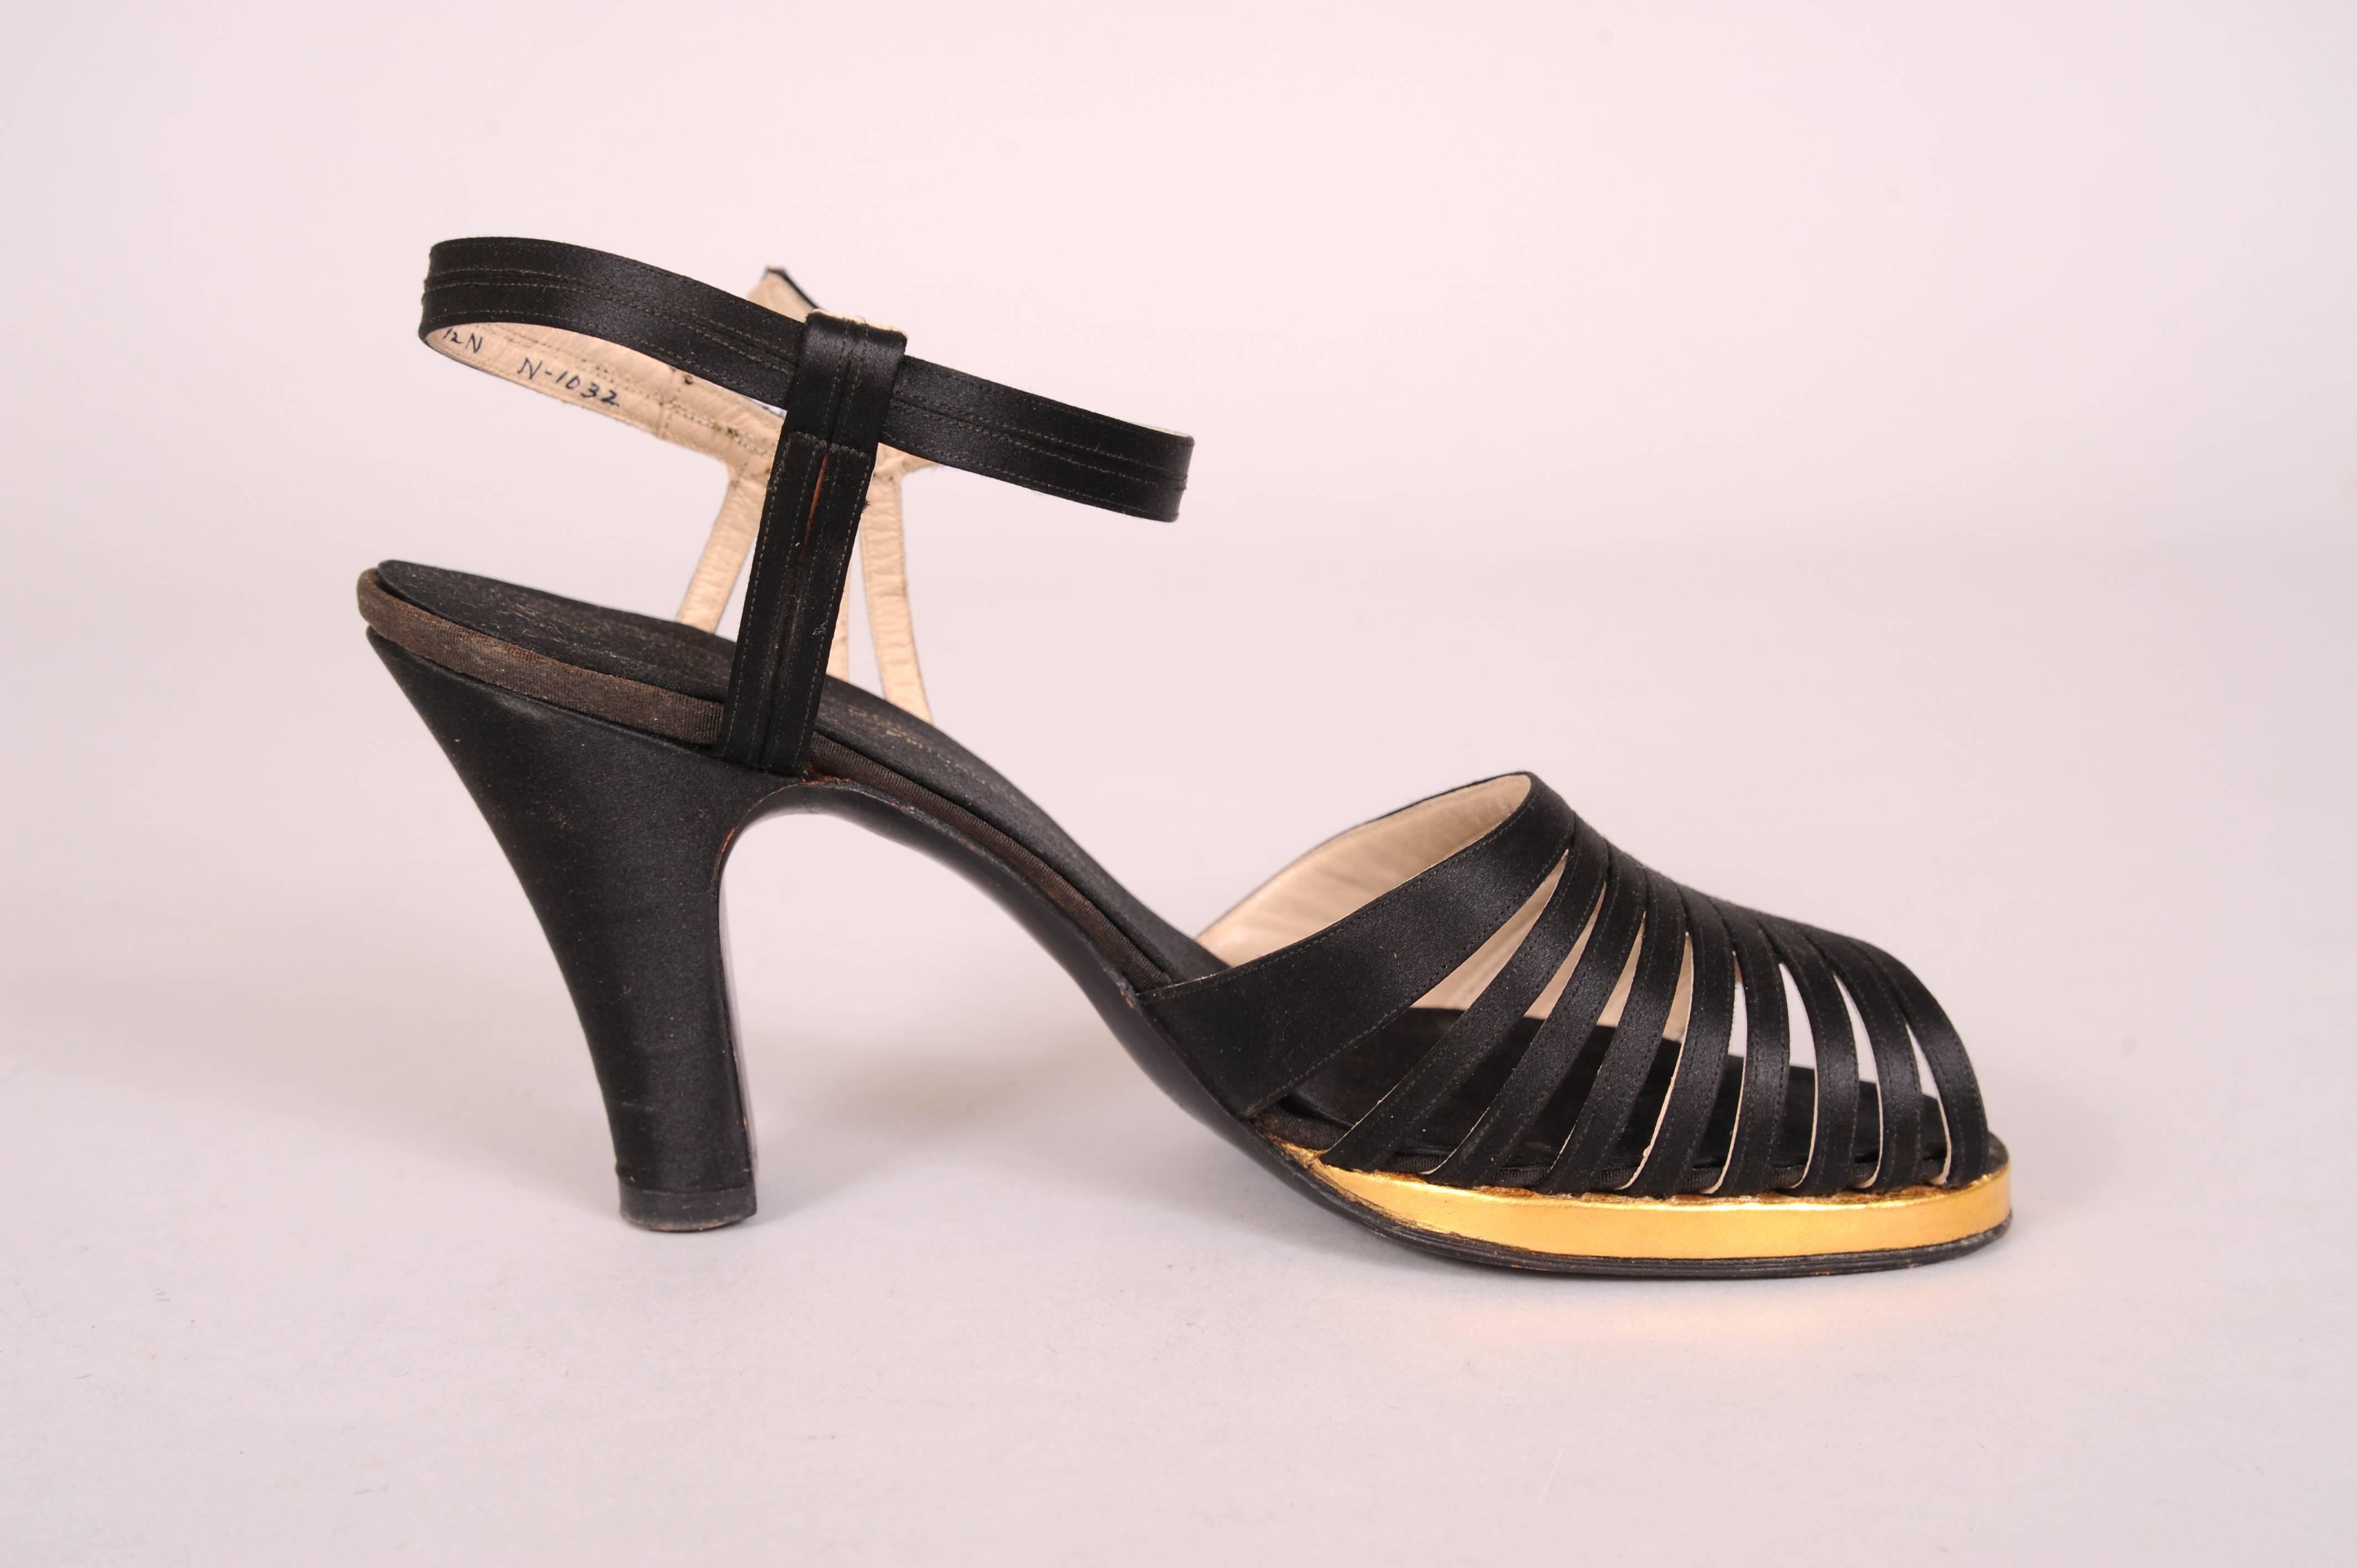 These lovely black silk evening shoes have nine leather backed silk straps, set on an angle, above a gold kid platform. The ankle strap has four silk straps below the buckle. Worn only once they are in excellent condition with only minor wear to the